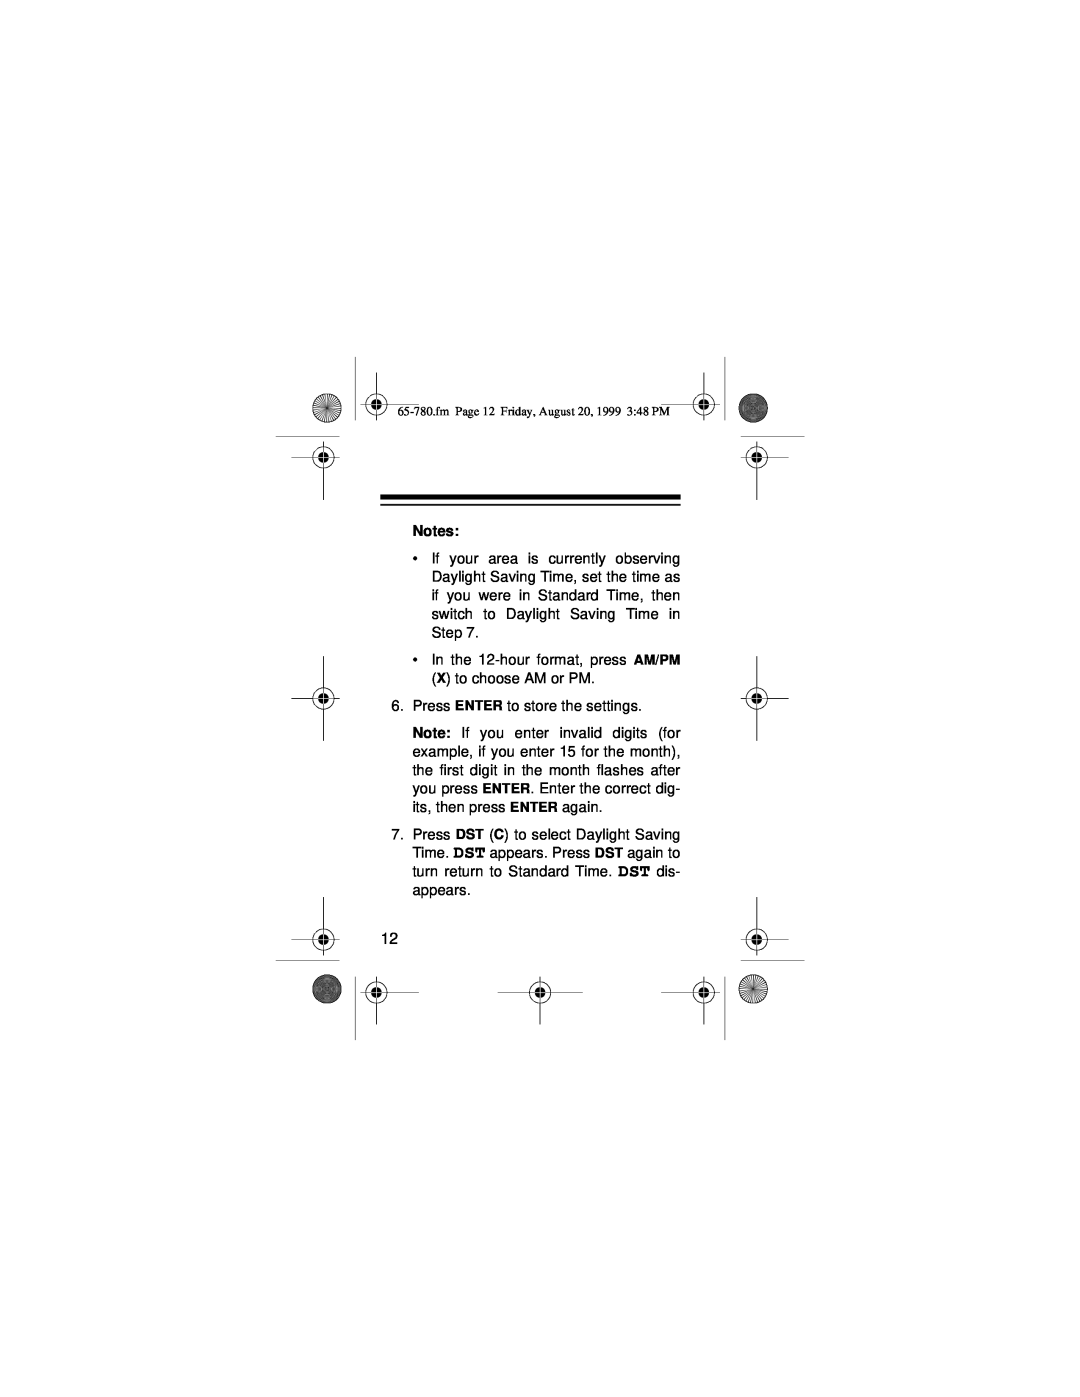 Samsung 256K owner manual In the 12-hour format, press AM/PM X to choose AM or PM 